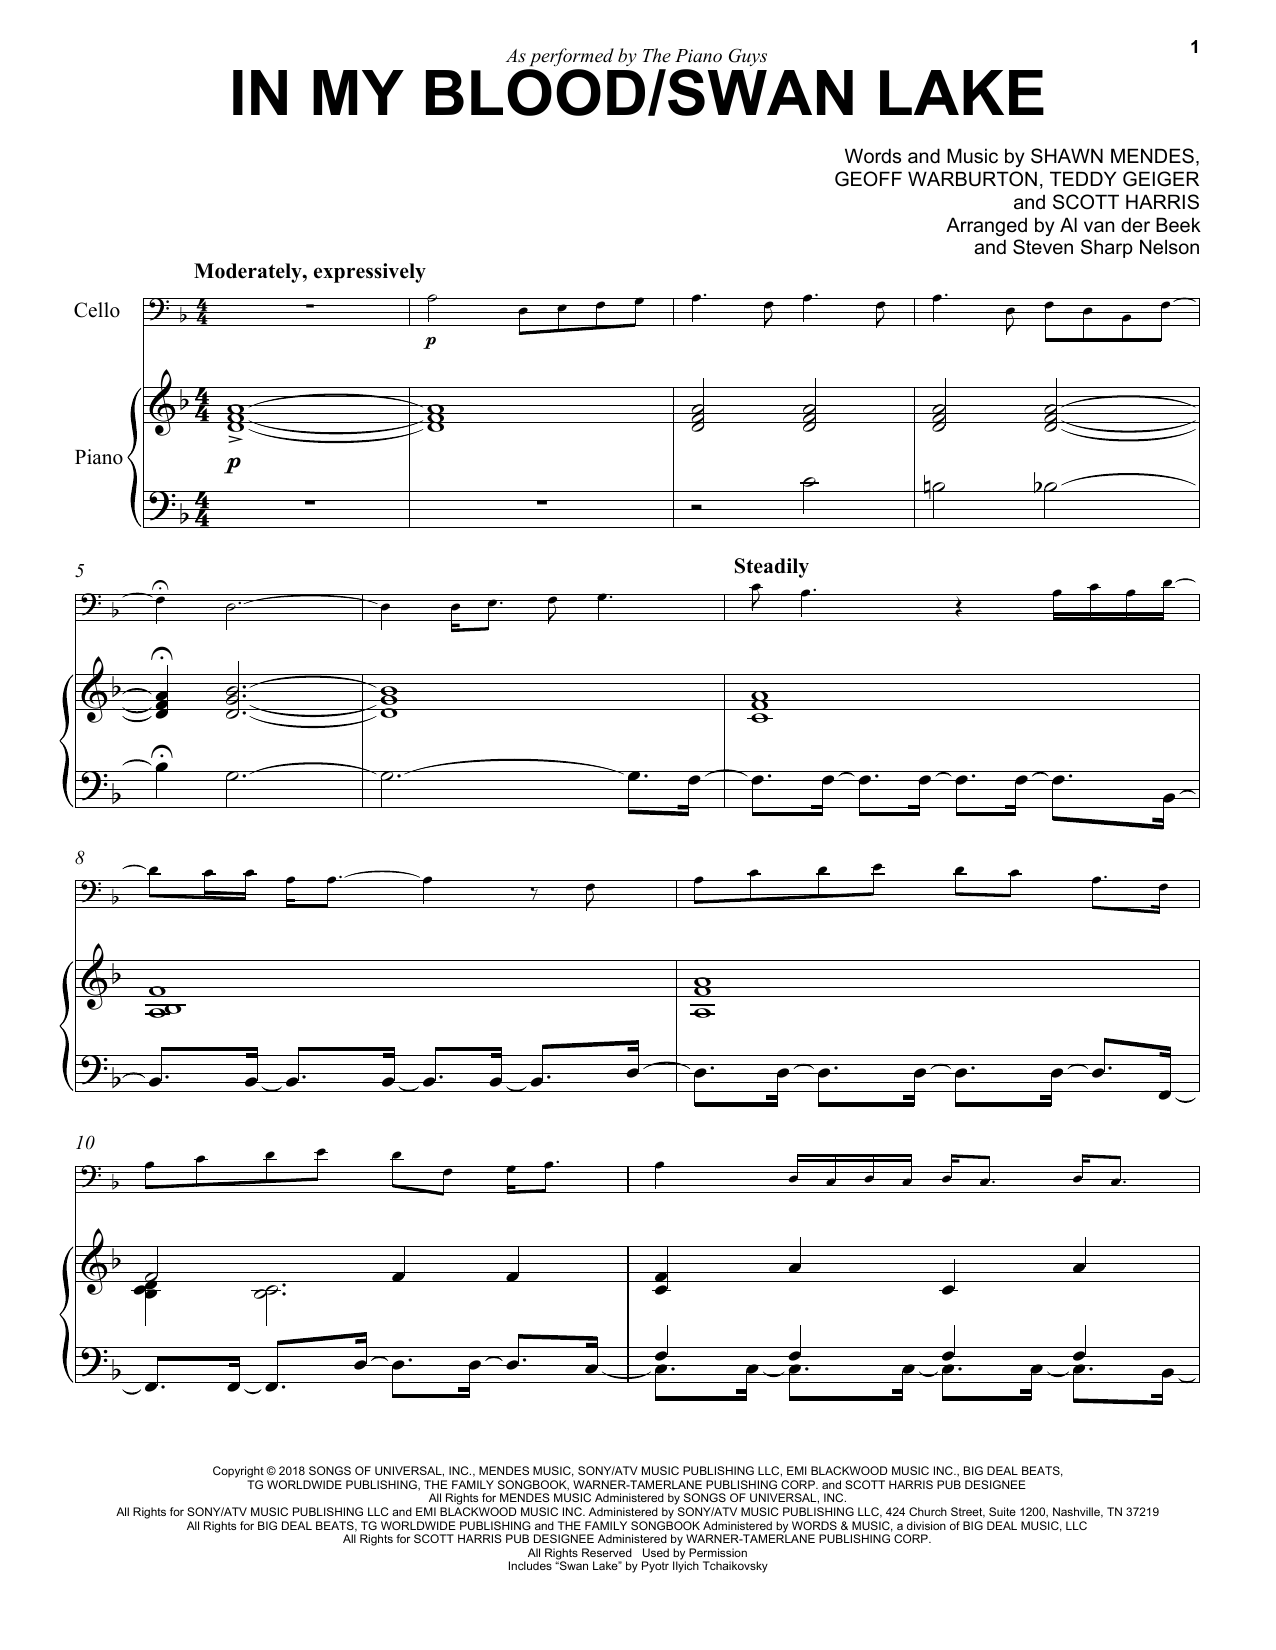 Download The Piano Guys In My Blood / Swan Lake Sheet Music